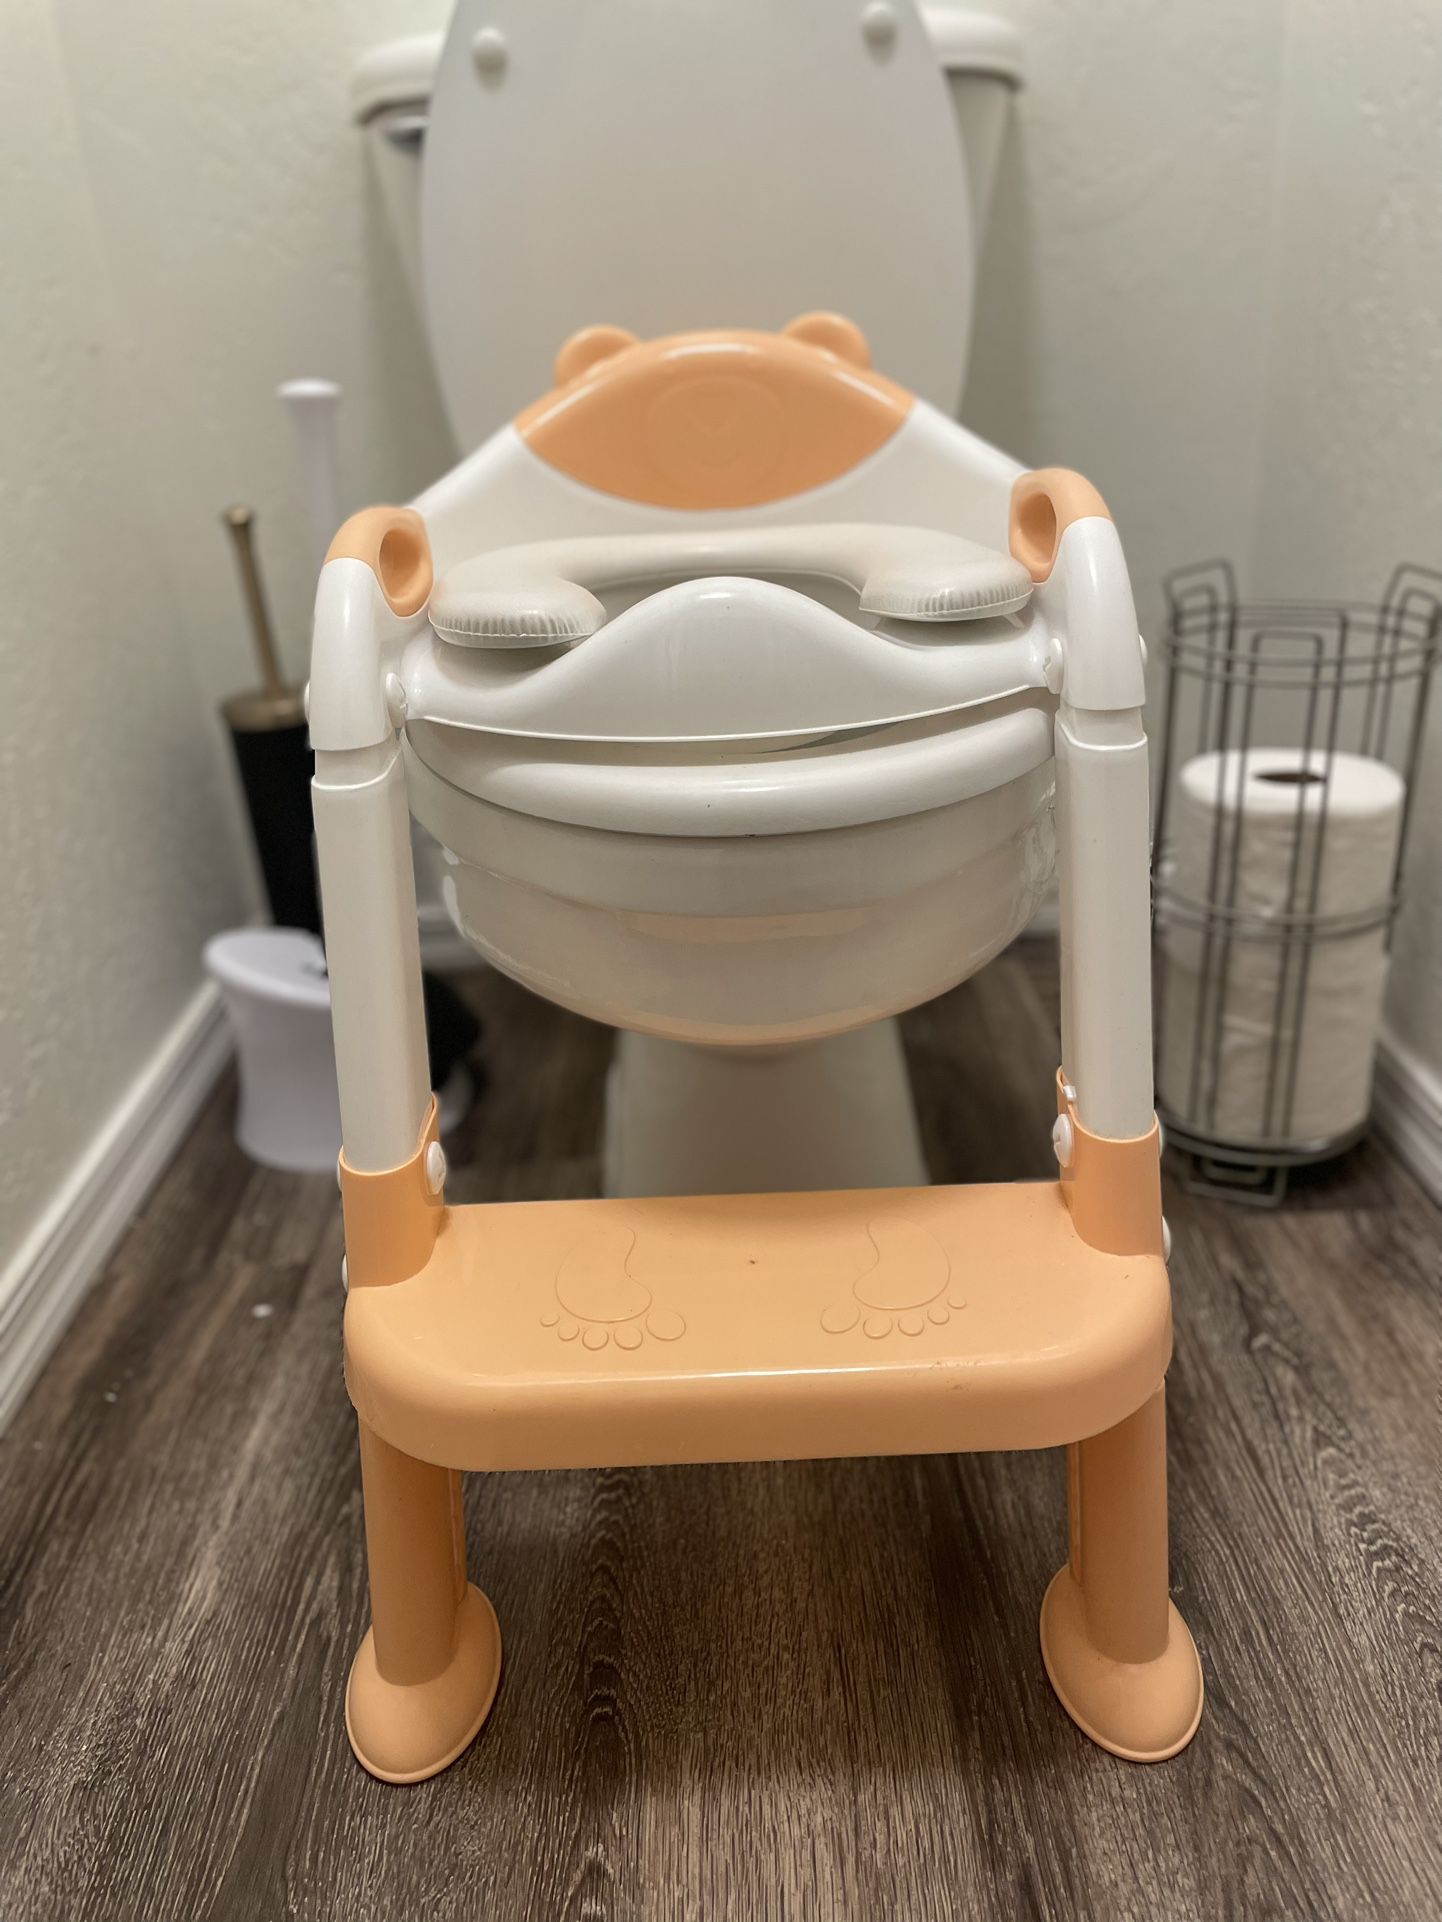 Potty training seat with ladder